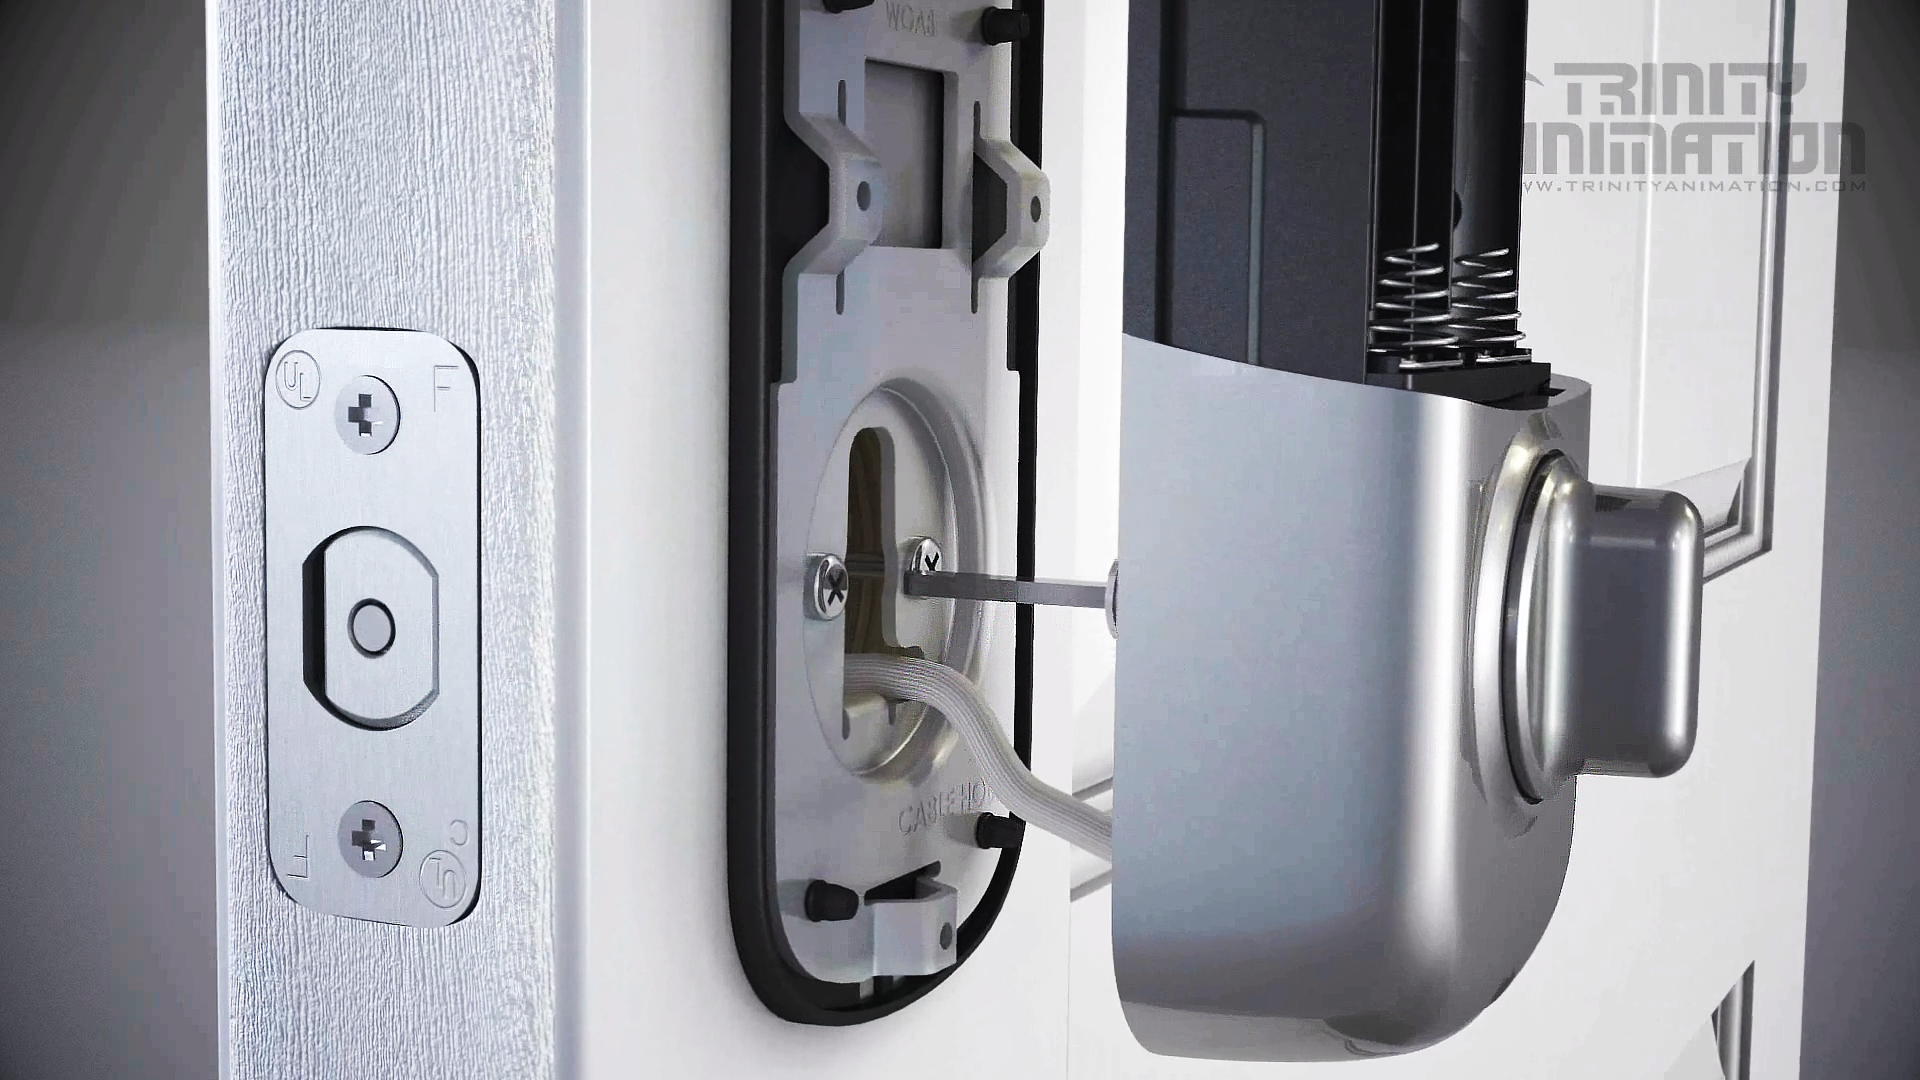 This is a 3D rendered shot from Trinity's 3D product visualization video demonstrating the installation process of the Yale Door Lock. This is a close-up shot demonstrating the insertion of the interior lock into the door latch- producing strategic camera angles that communicate the instructions in an easily understood way. Realistic textures are displayed of the different materials in this shot such as the wooden door, metal latch, and plastic and metal door lock parts, and more.